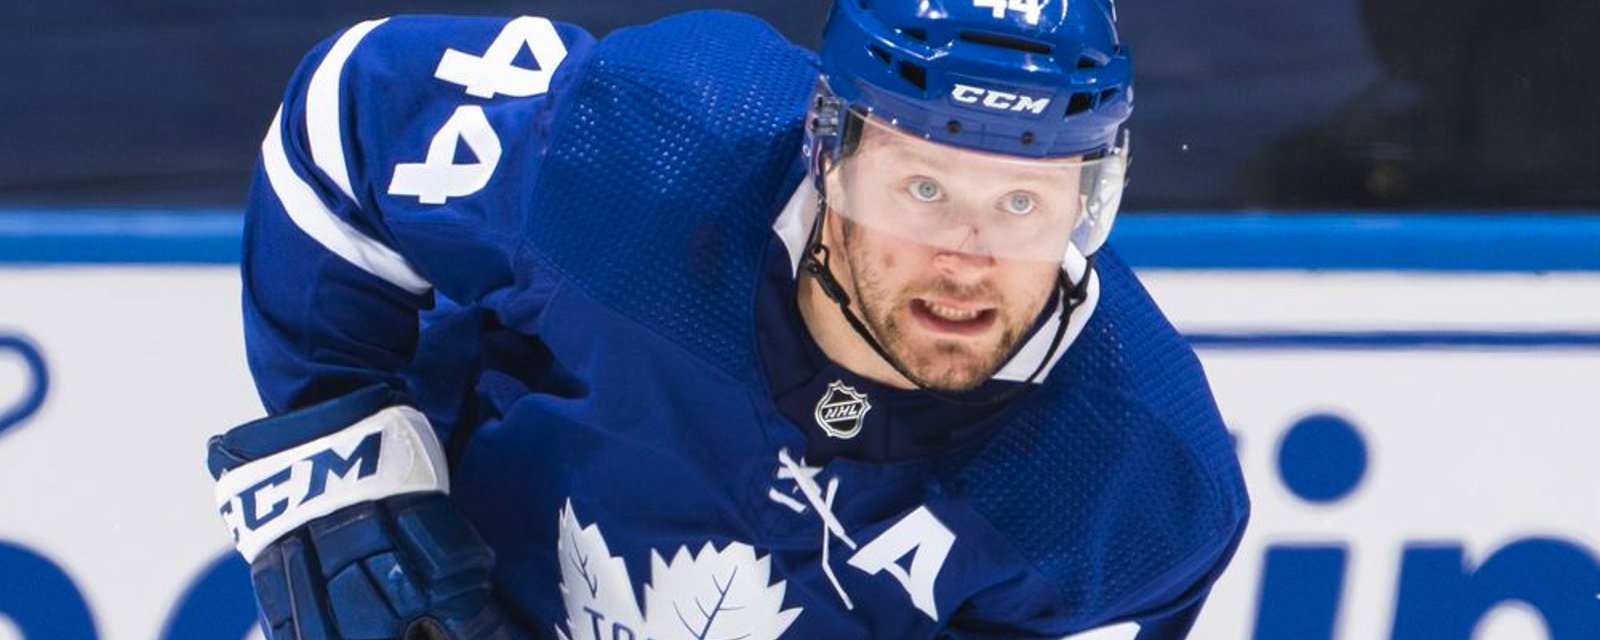 Elliotte Friedman reports on sticking point between Leafs and Morgan Rielly in contract negotiations